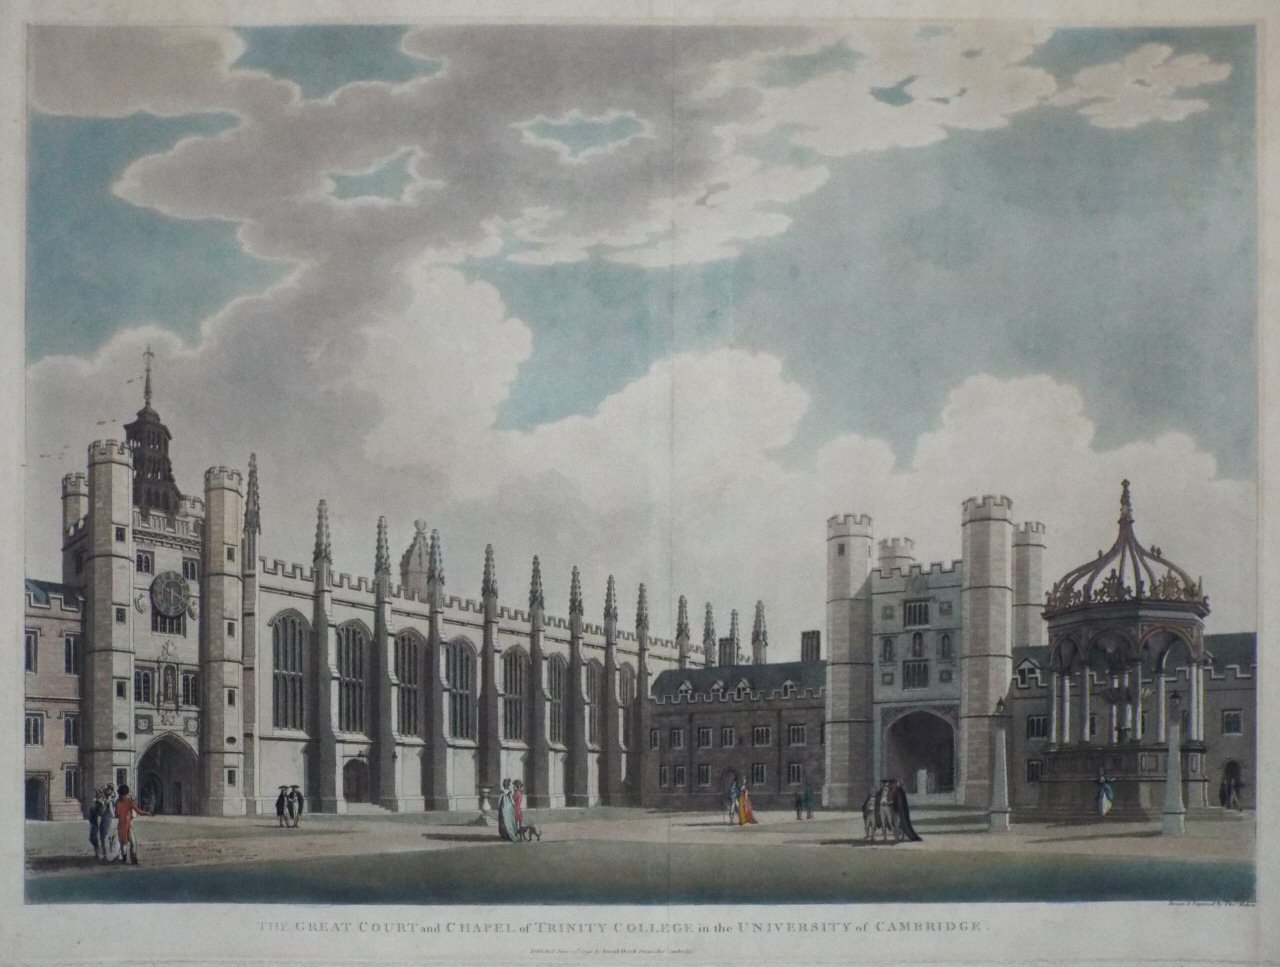 Aquatint - The Great Court and Chapel of Trinity College in the University of Cambridge. - Malton